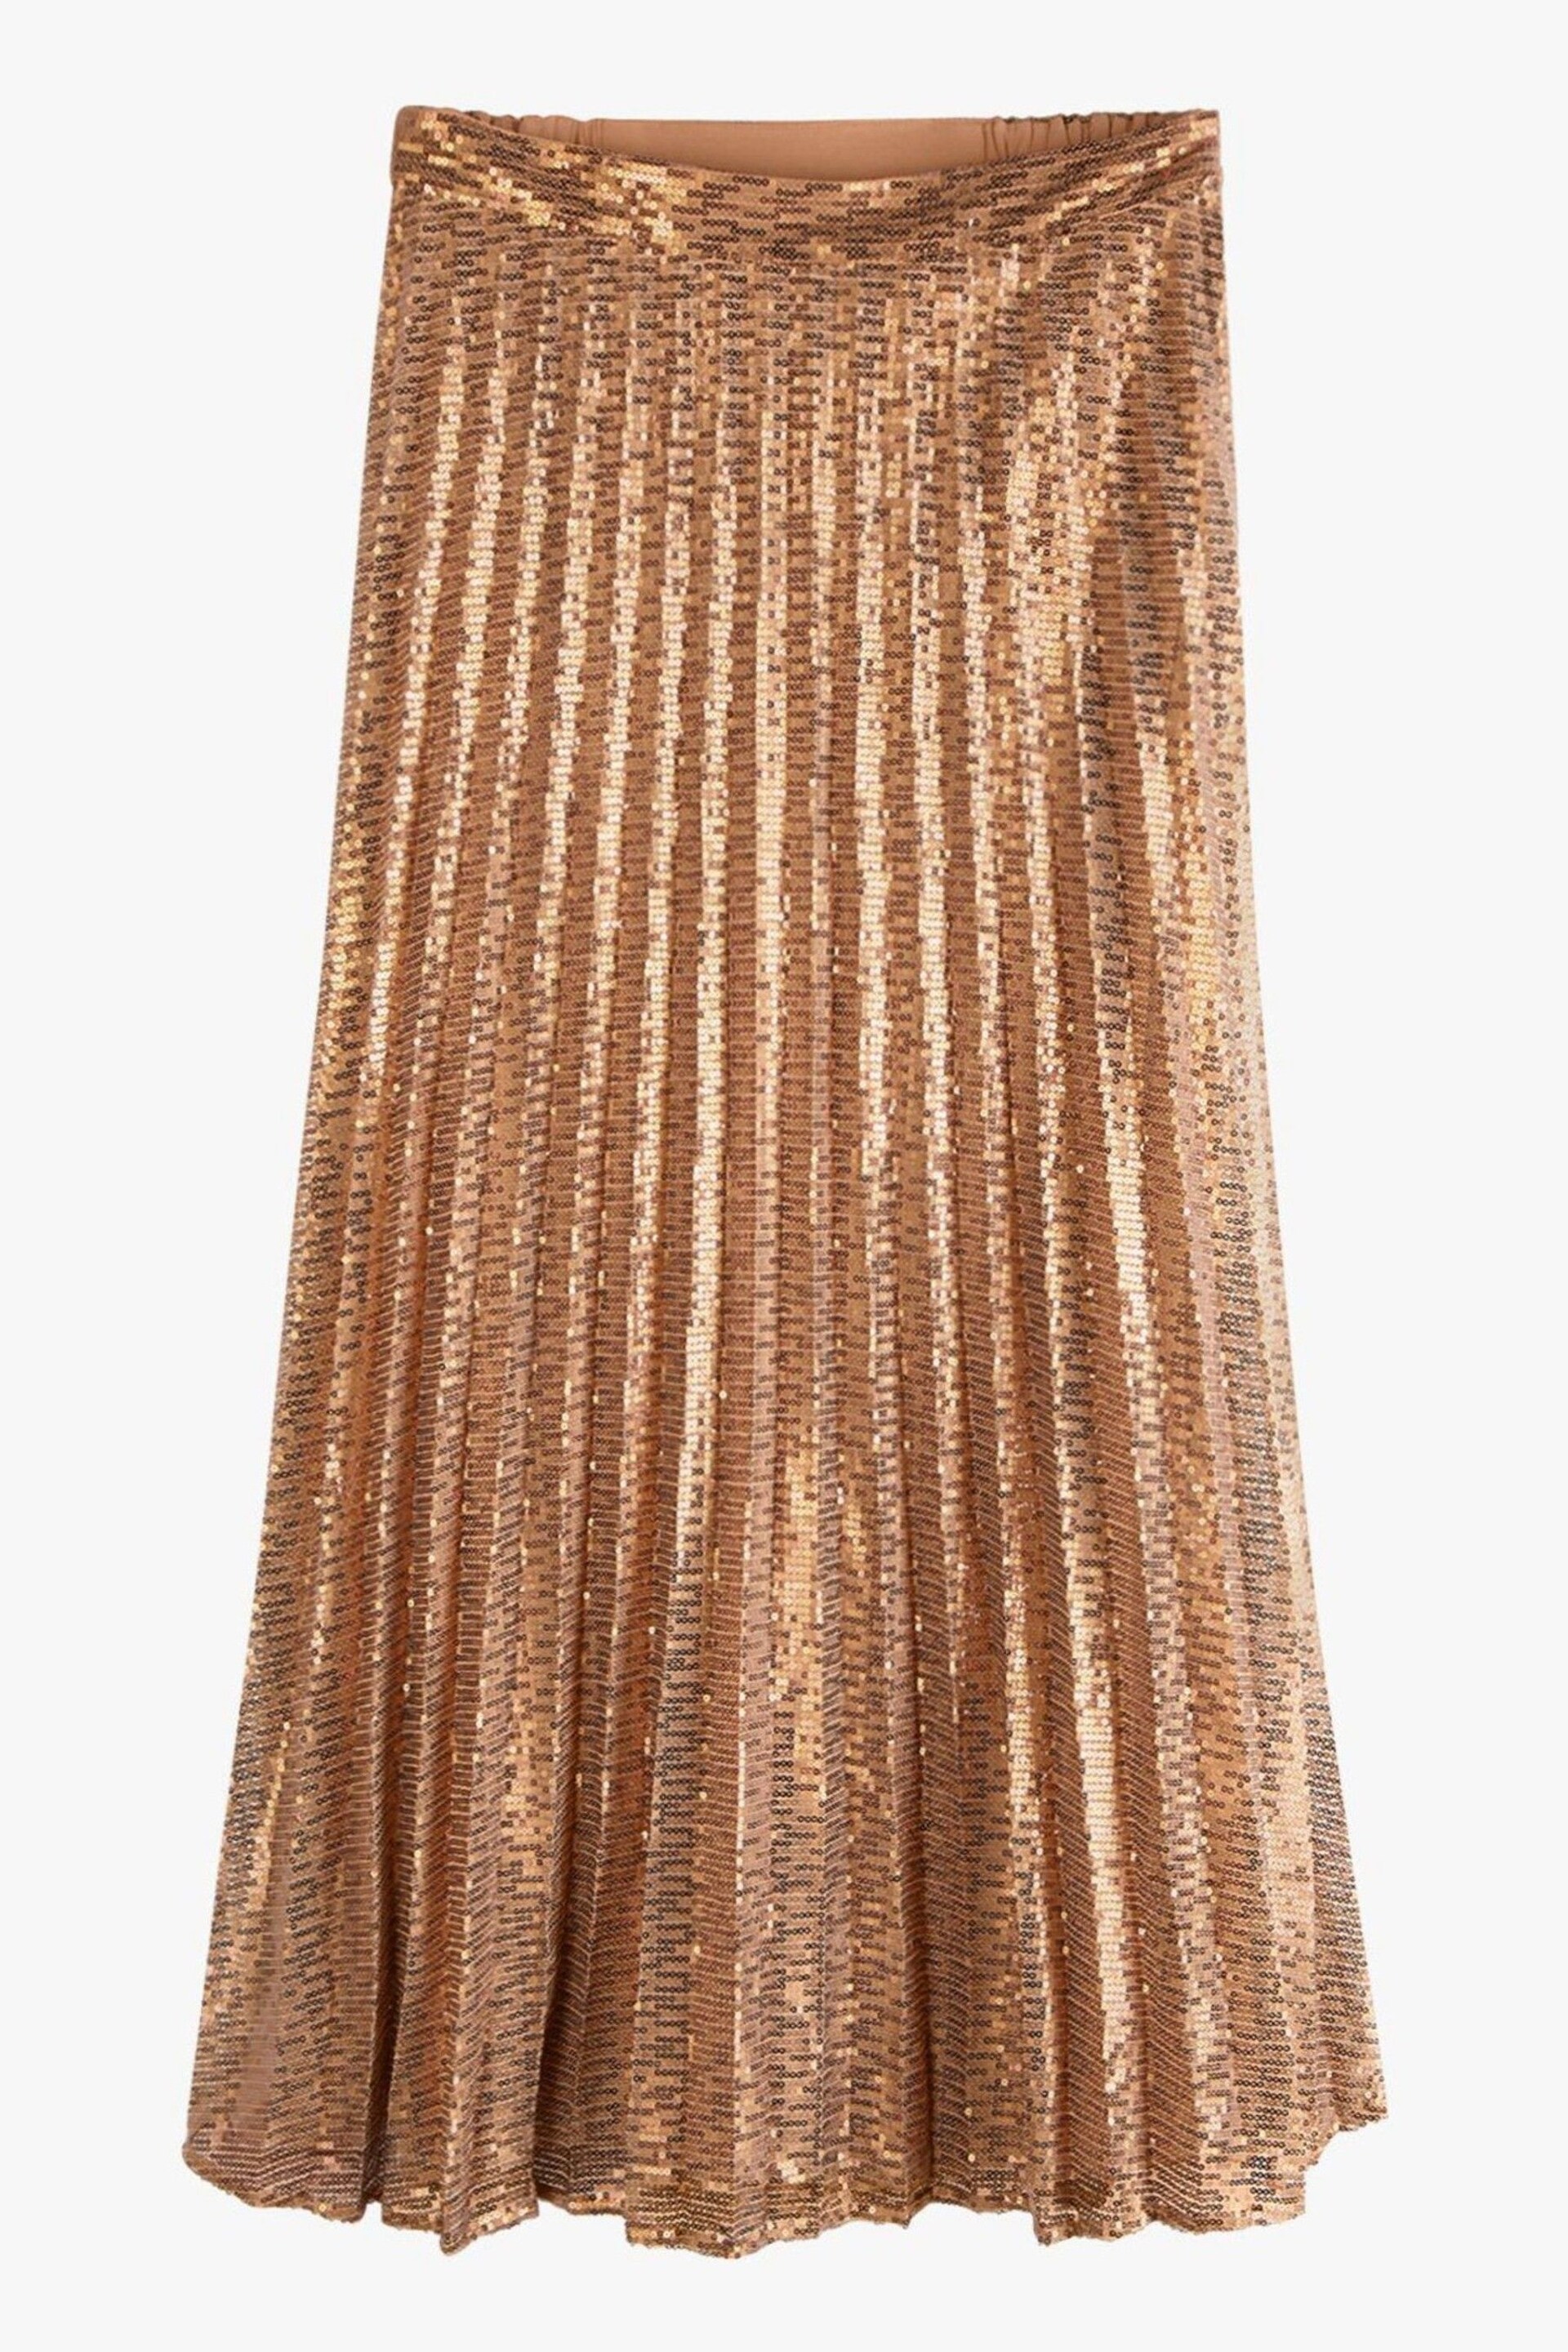 Hush Gold Clio Pleated Sequin Skirt - Image 5 of 5